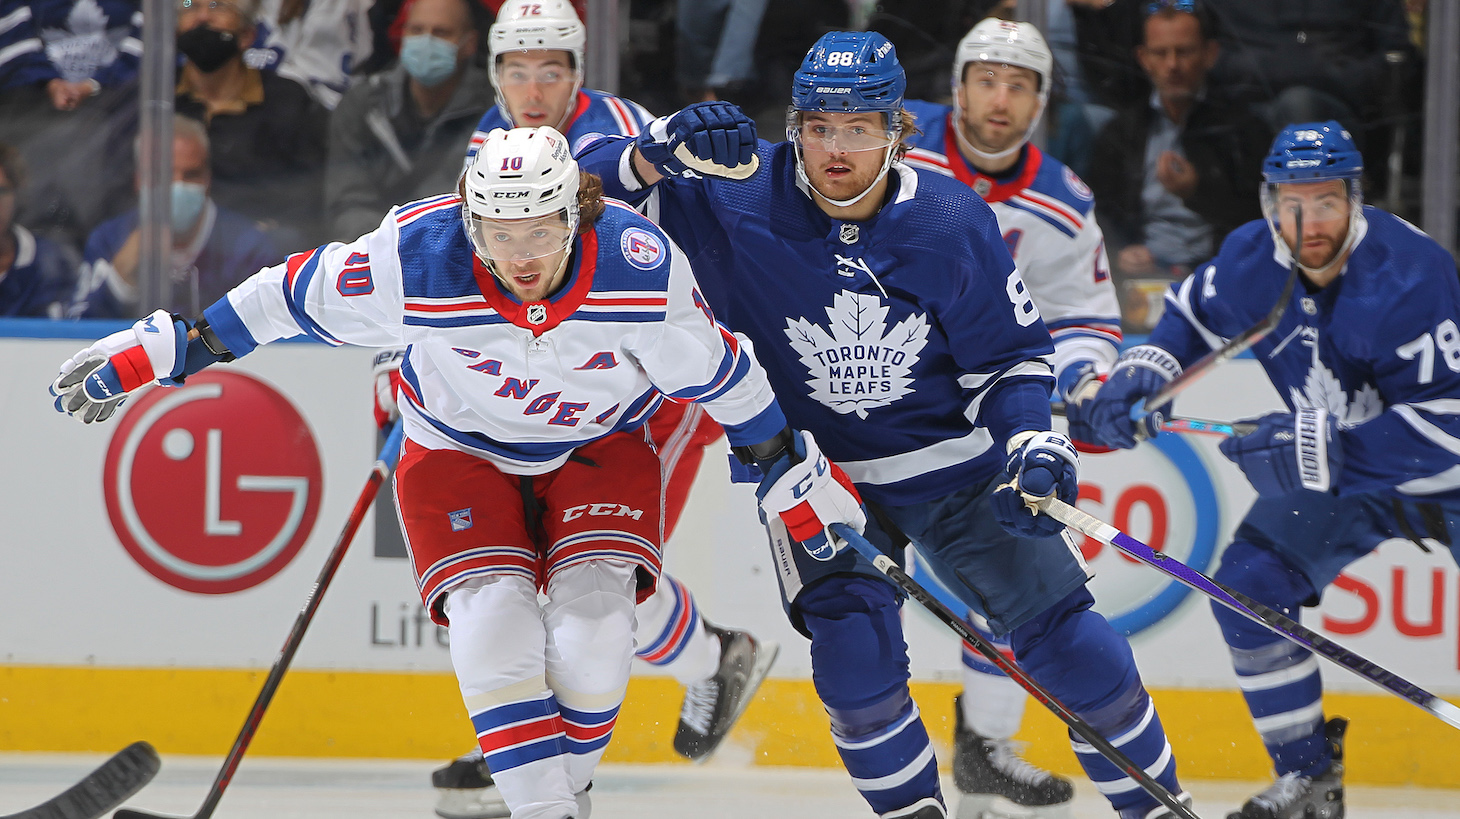 TORONTO, ON - OCTOBER 18: Artemi Panarin #10 of the New York Rangers skates against William Nylander #88 of the Toronto Maple Leafs during an NHL game at Scotiabank Arena on October 18, 2021 in Toronto, Ontario, Canada. (Photo by Claus Andersen/Getty Images) *** Local Caption *** Artemi Panarin; William Nylander